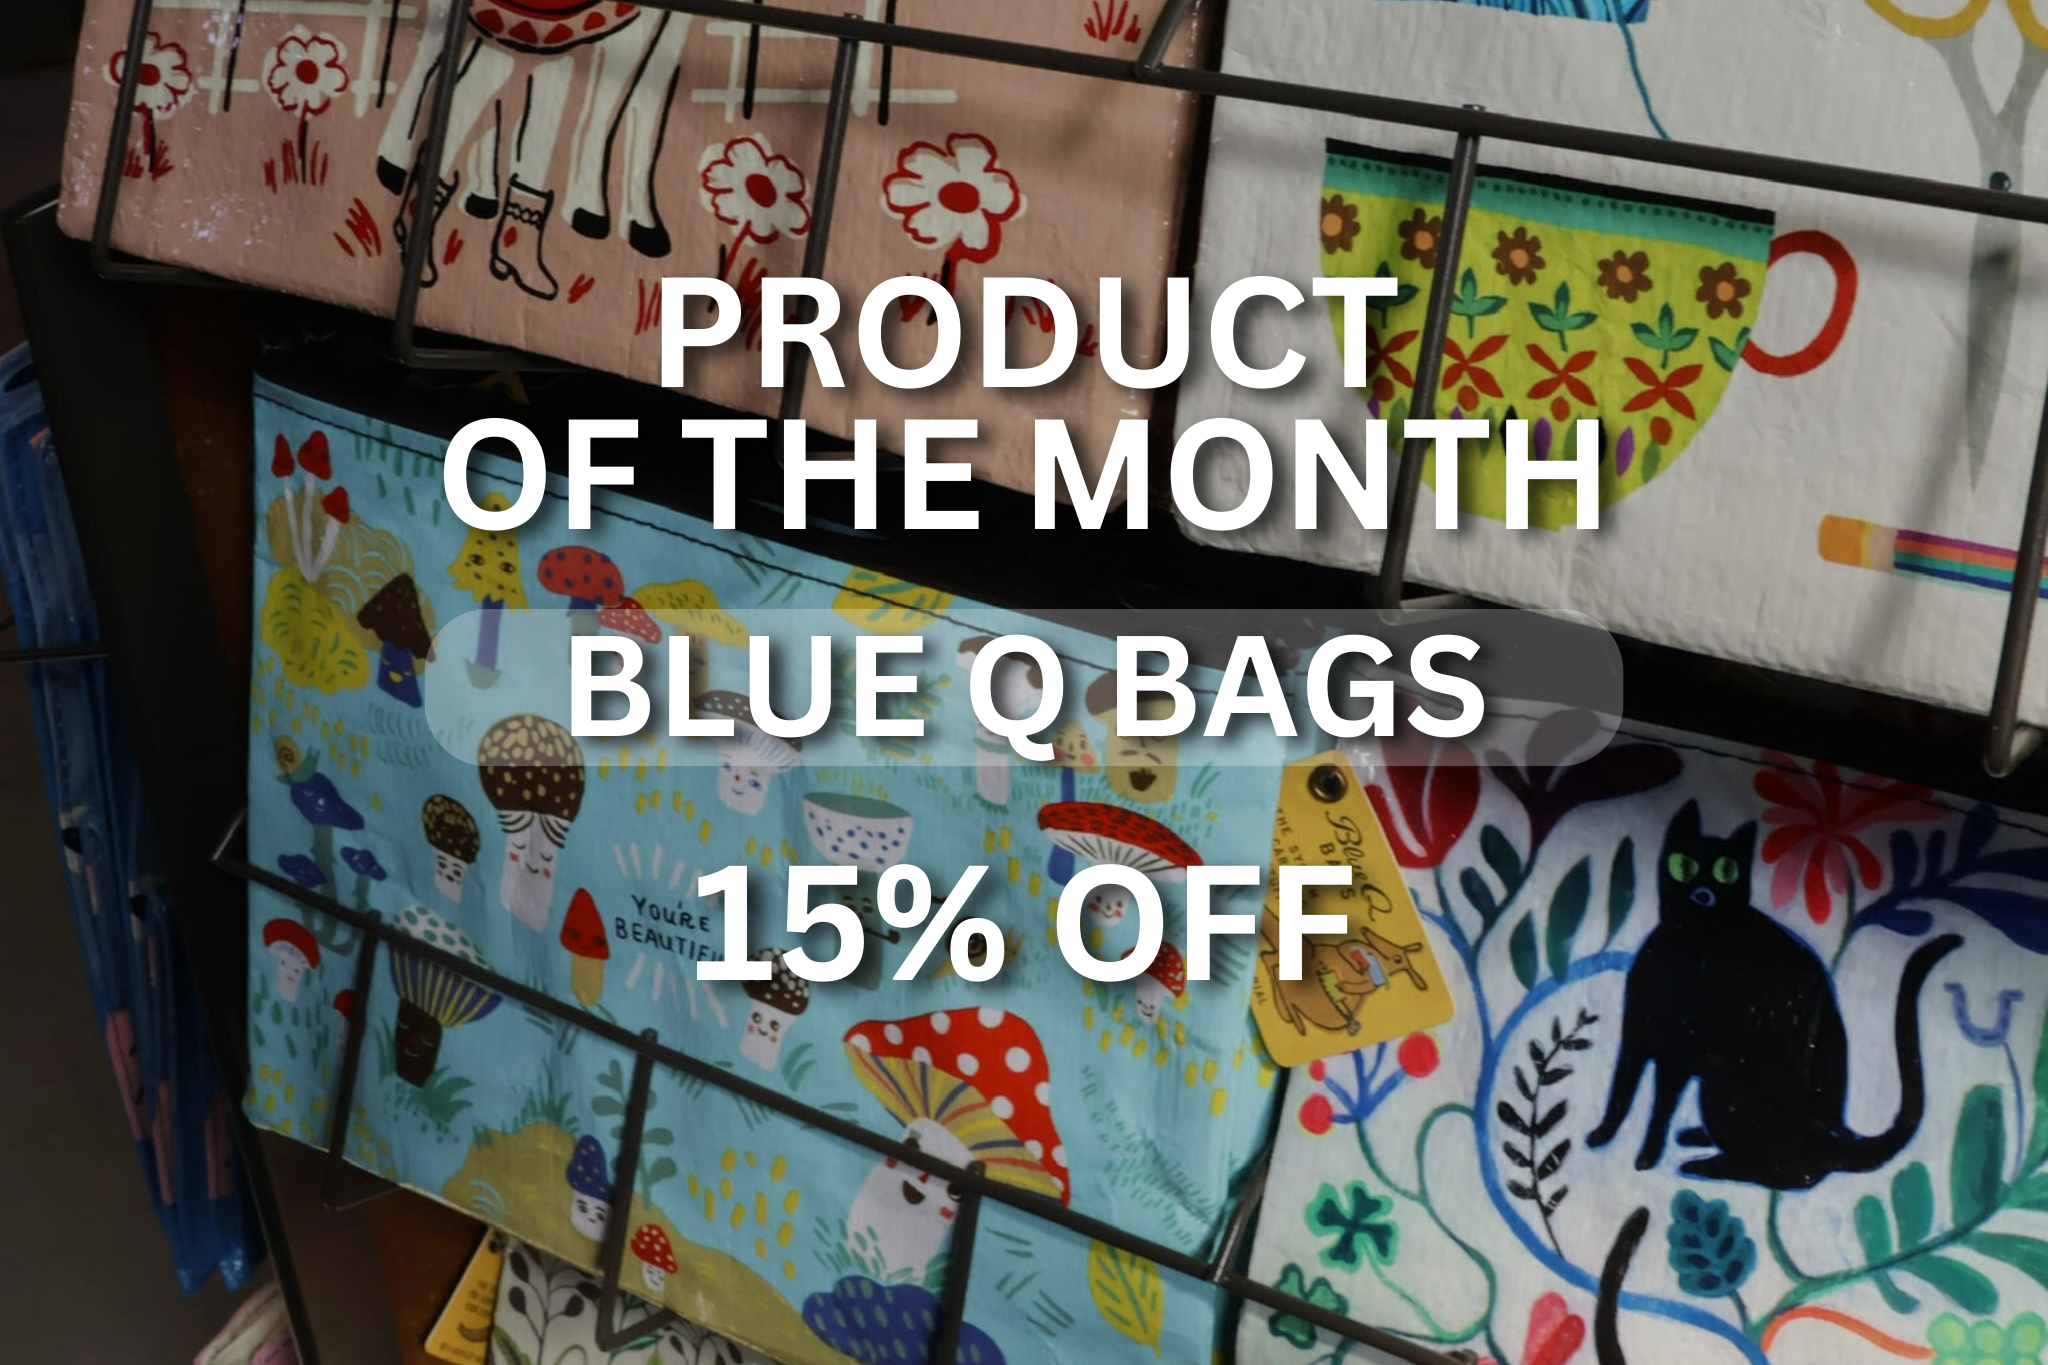 blue que bags are 15% off